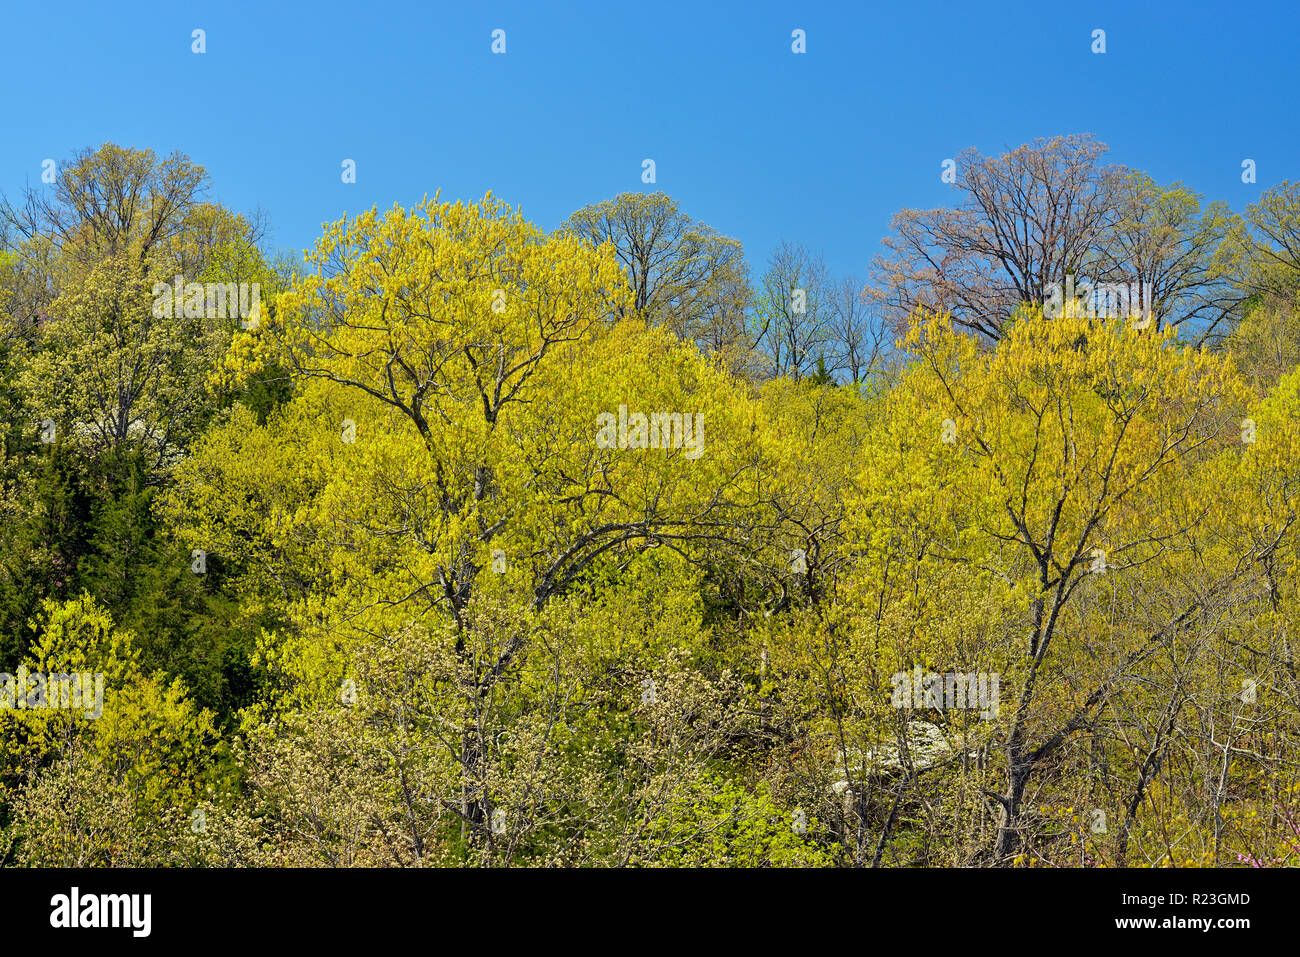 Spring foliage leafing out in deciduous trees, Ava, Missouri, USA Stock Photo